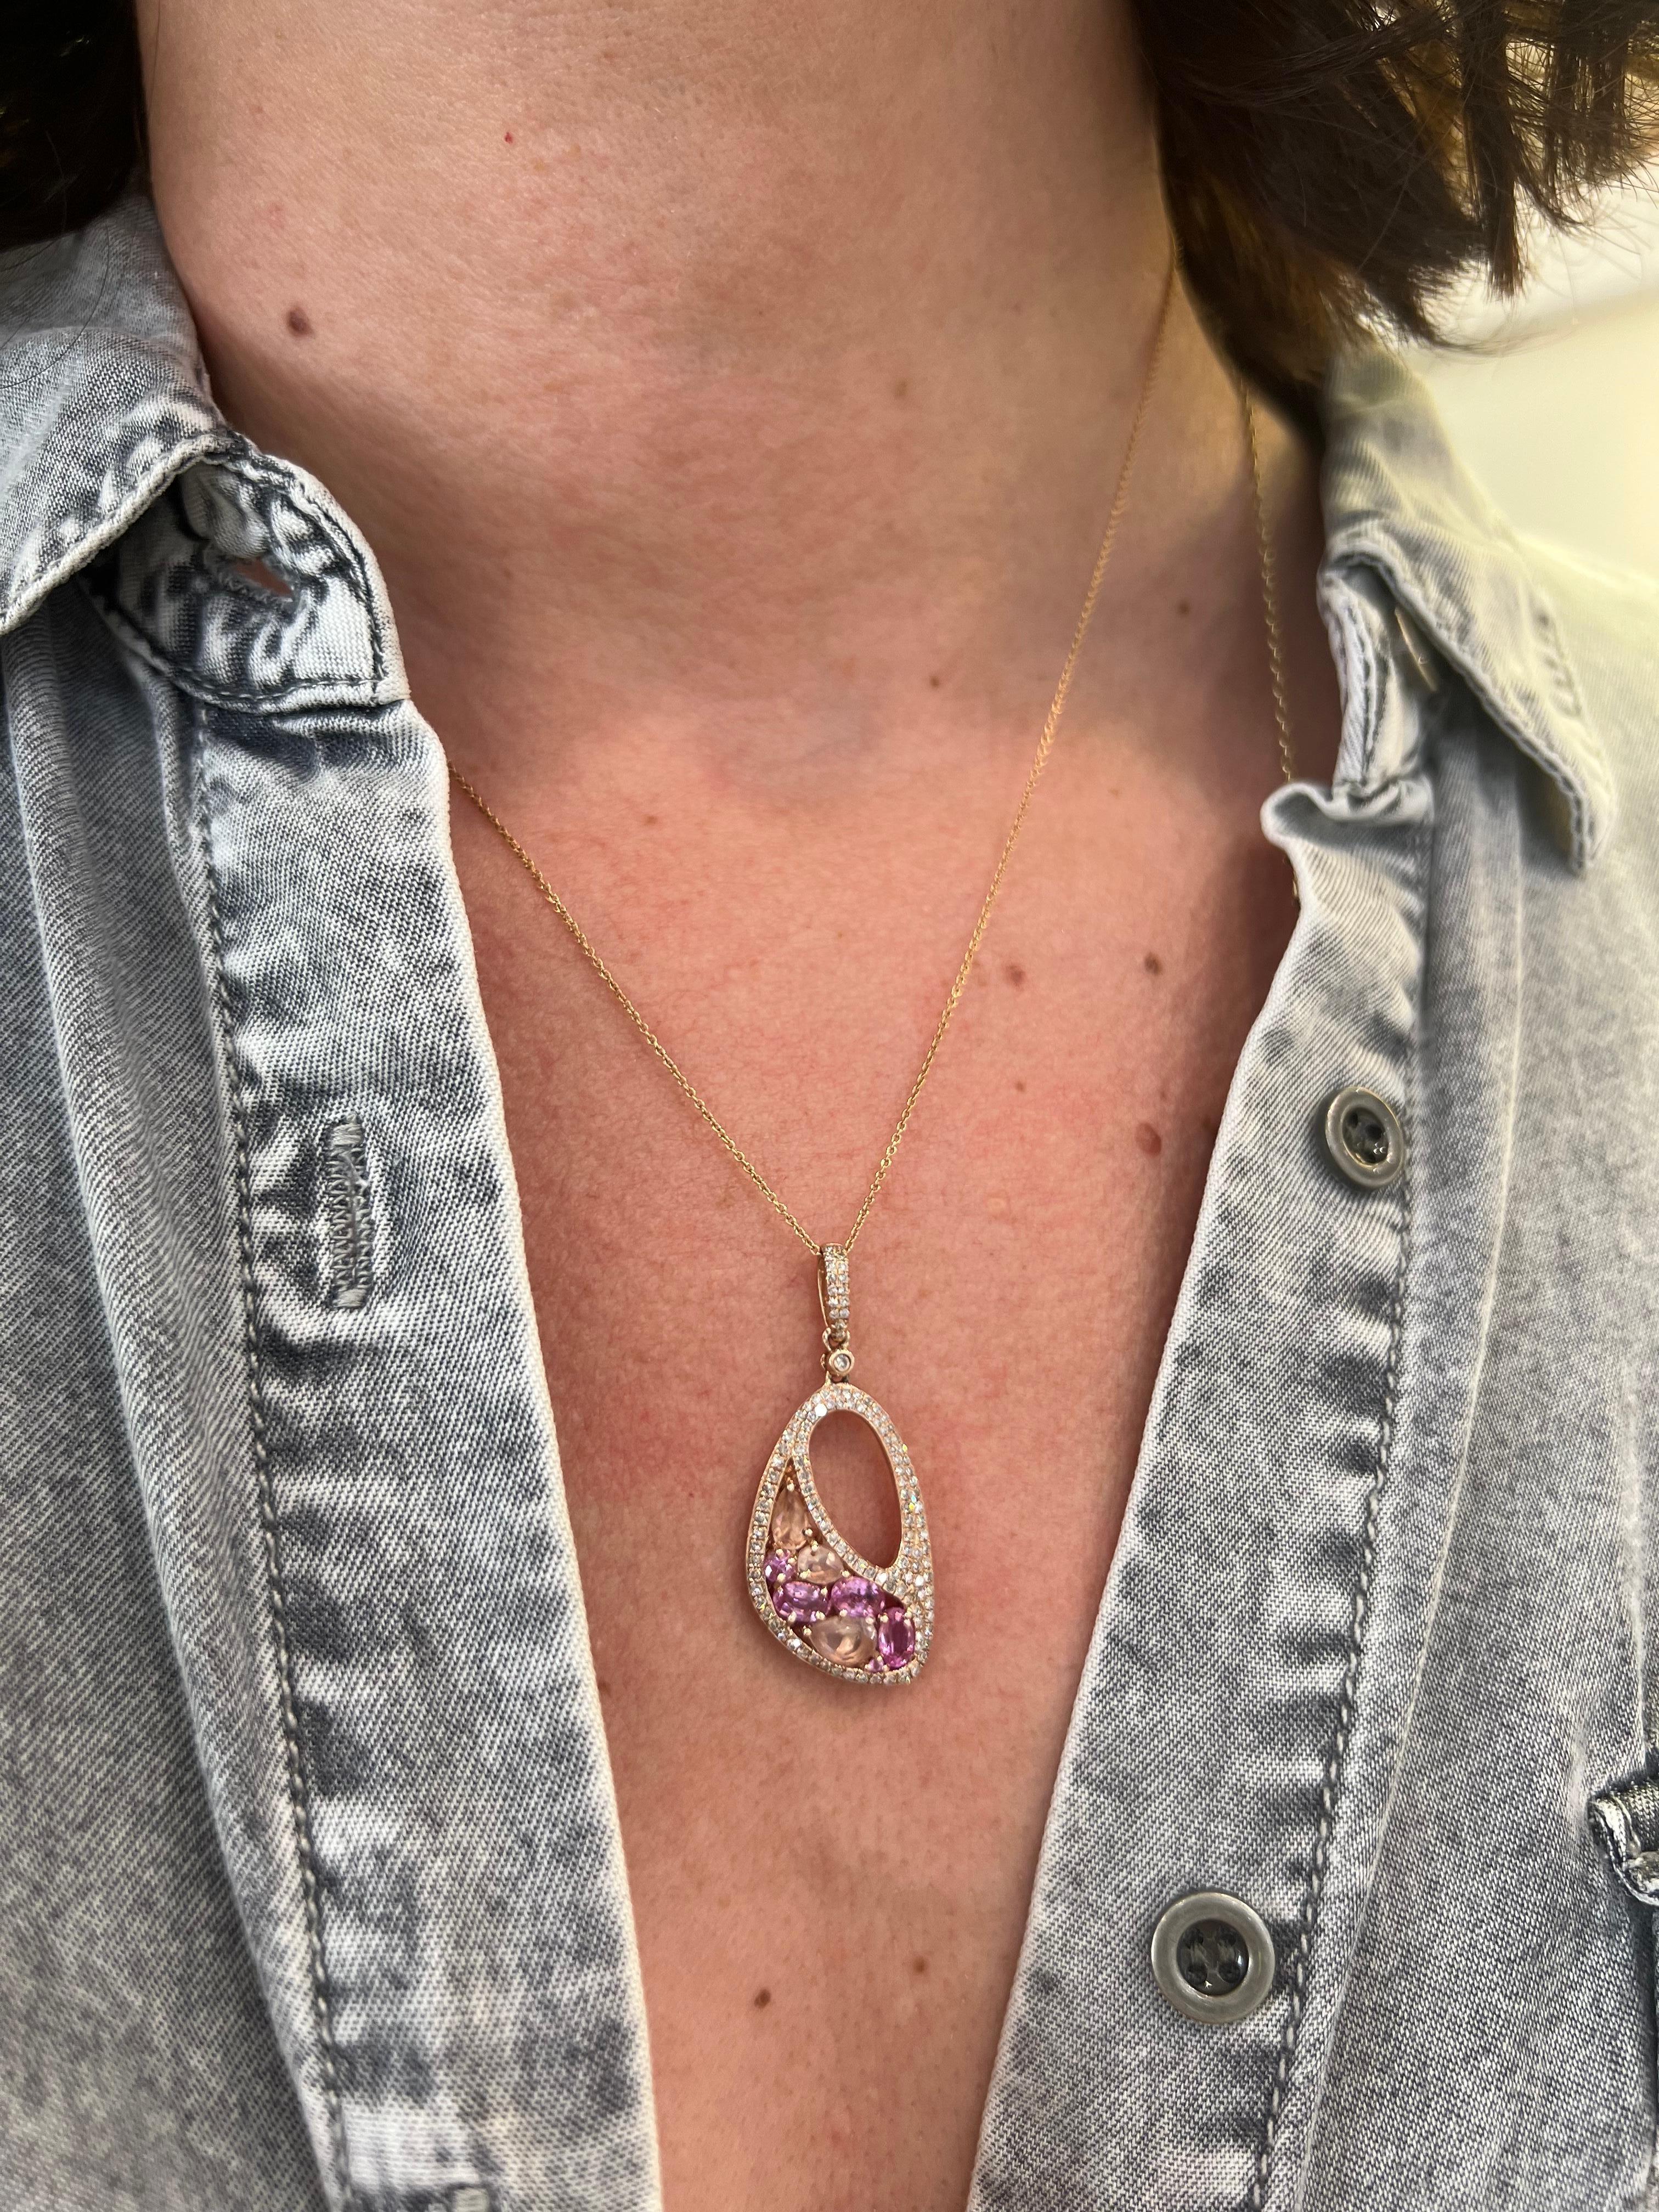 14K rose gold pendant necklace with diamonds, rose quartz and pink sapphires.

Features

14k rose gold 
.42 carat total weight round diamonds
4 oval shape faceted pink sapphires
3 faceted pear shape rose quartz
14K, 18' rose gold chain with